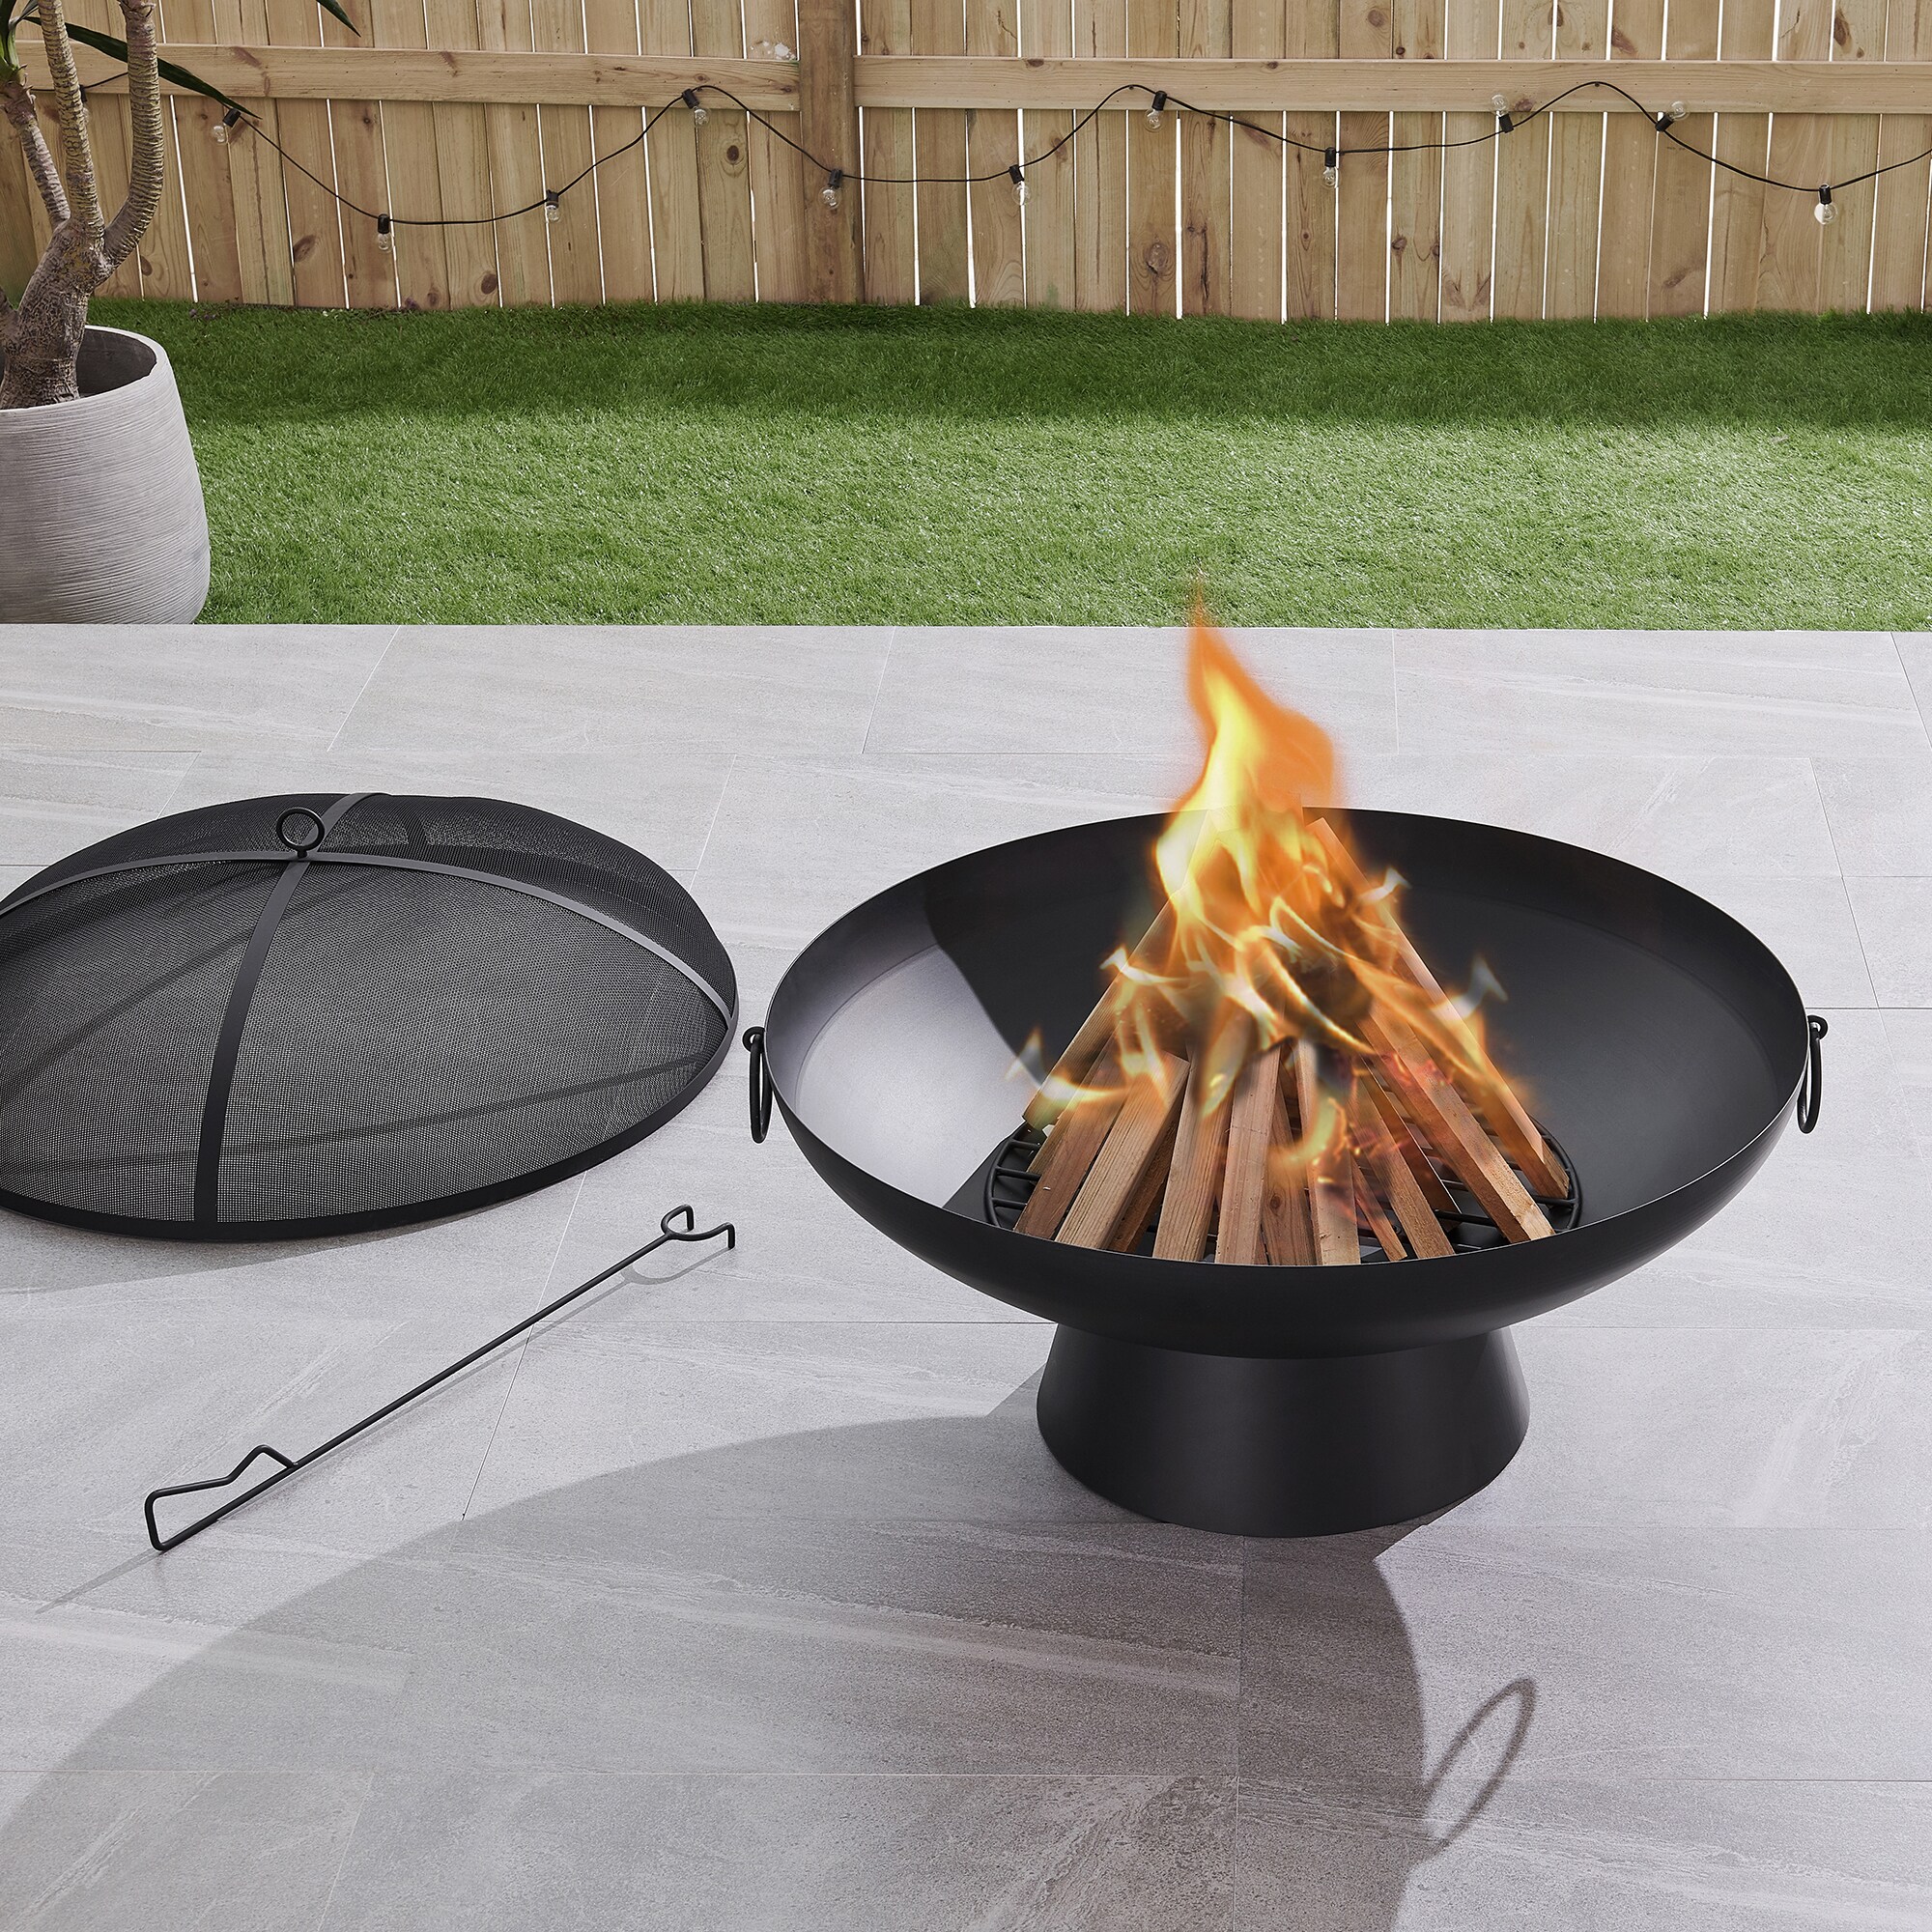 Round Fire Pit Dark Charcoal Ove Decors Brooks Wood Burning 28 in 